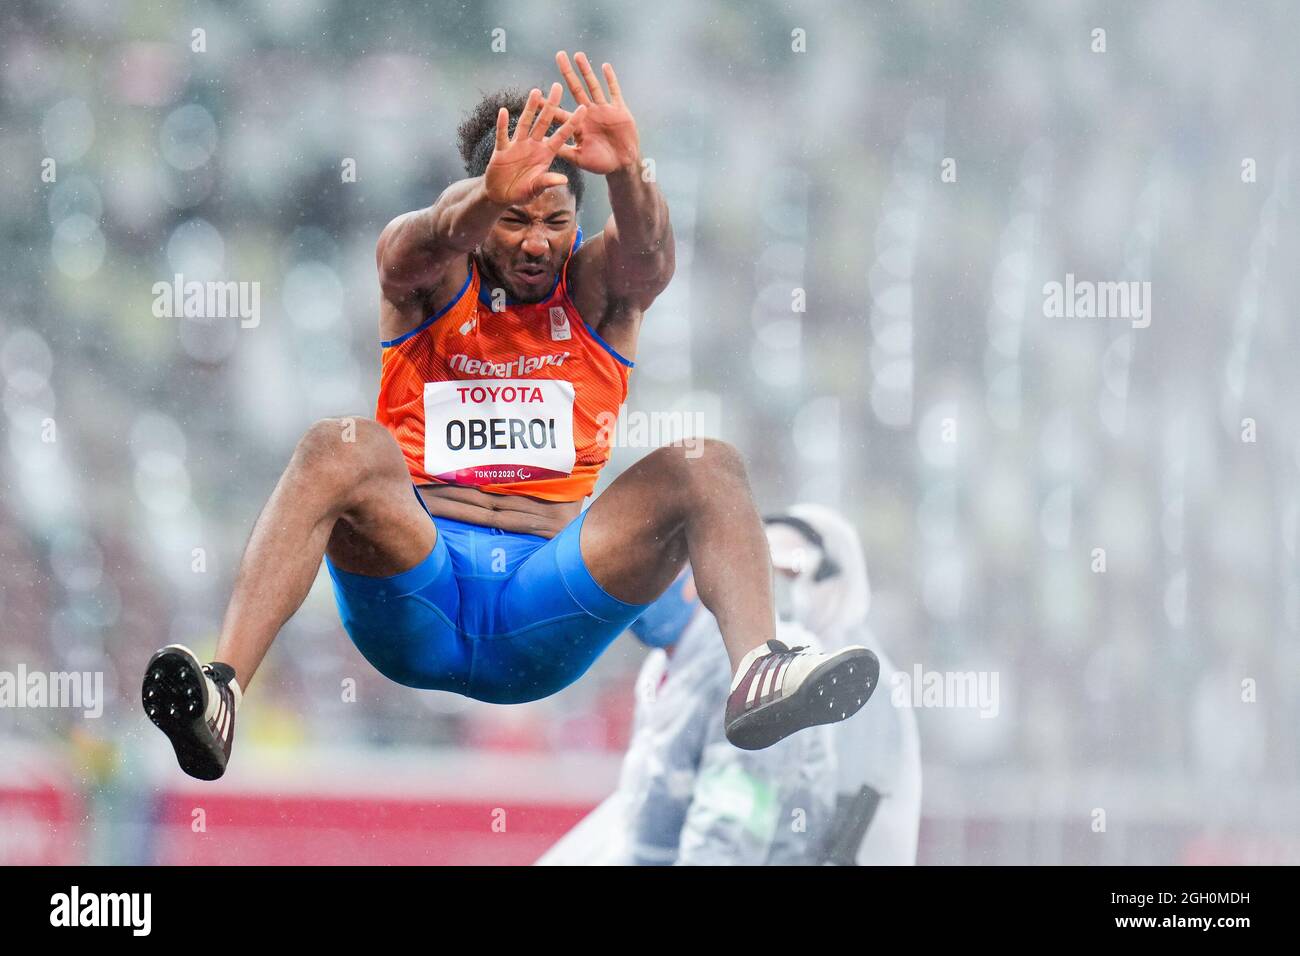 Tokyo, Japan. 04th Sep, 2021. TOKYO, JAPAN - SEPTEMBER 4: Ranki Oberoi of The Netherlands competing on Men's Long Jump - T20 Final during the Tokyo 2020 Paralympic Games at Olympic Stadium on September 4, 2021 in Tokyo, Japan (Photo by Helene Wiesenhaan/Orange Pictures) NOCNSF Atletiekunie Credit: Orange Pics BV/Alamy Live News Stock Photo